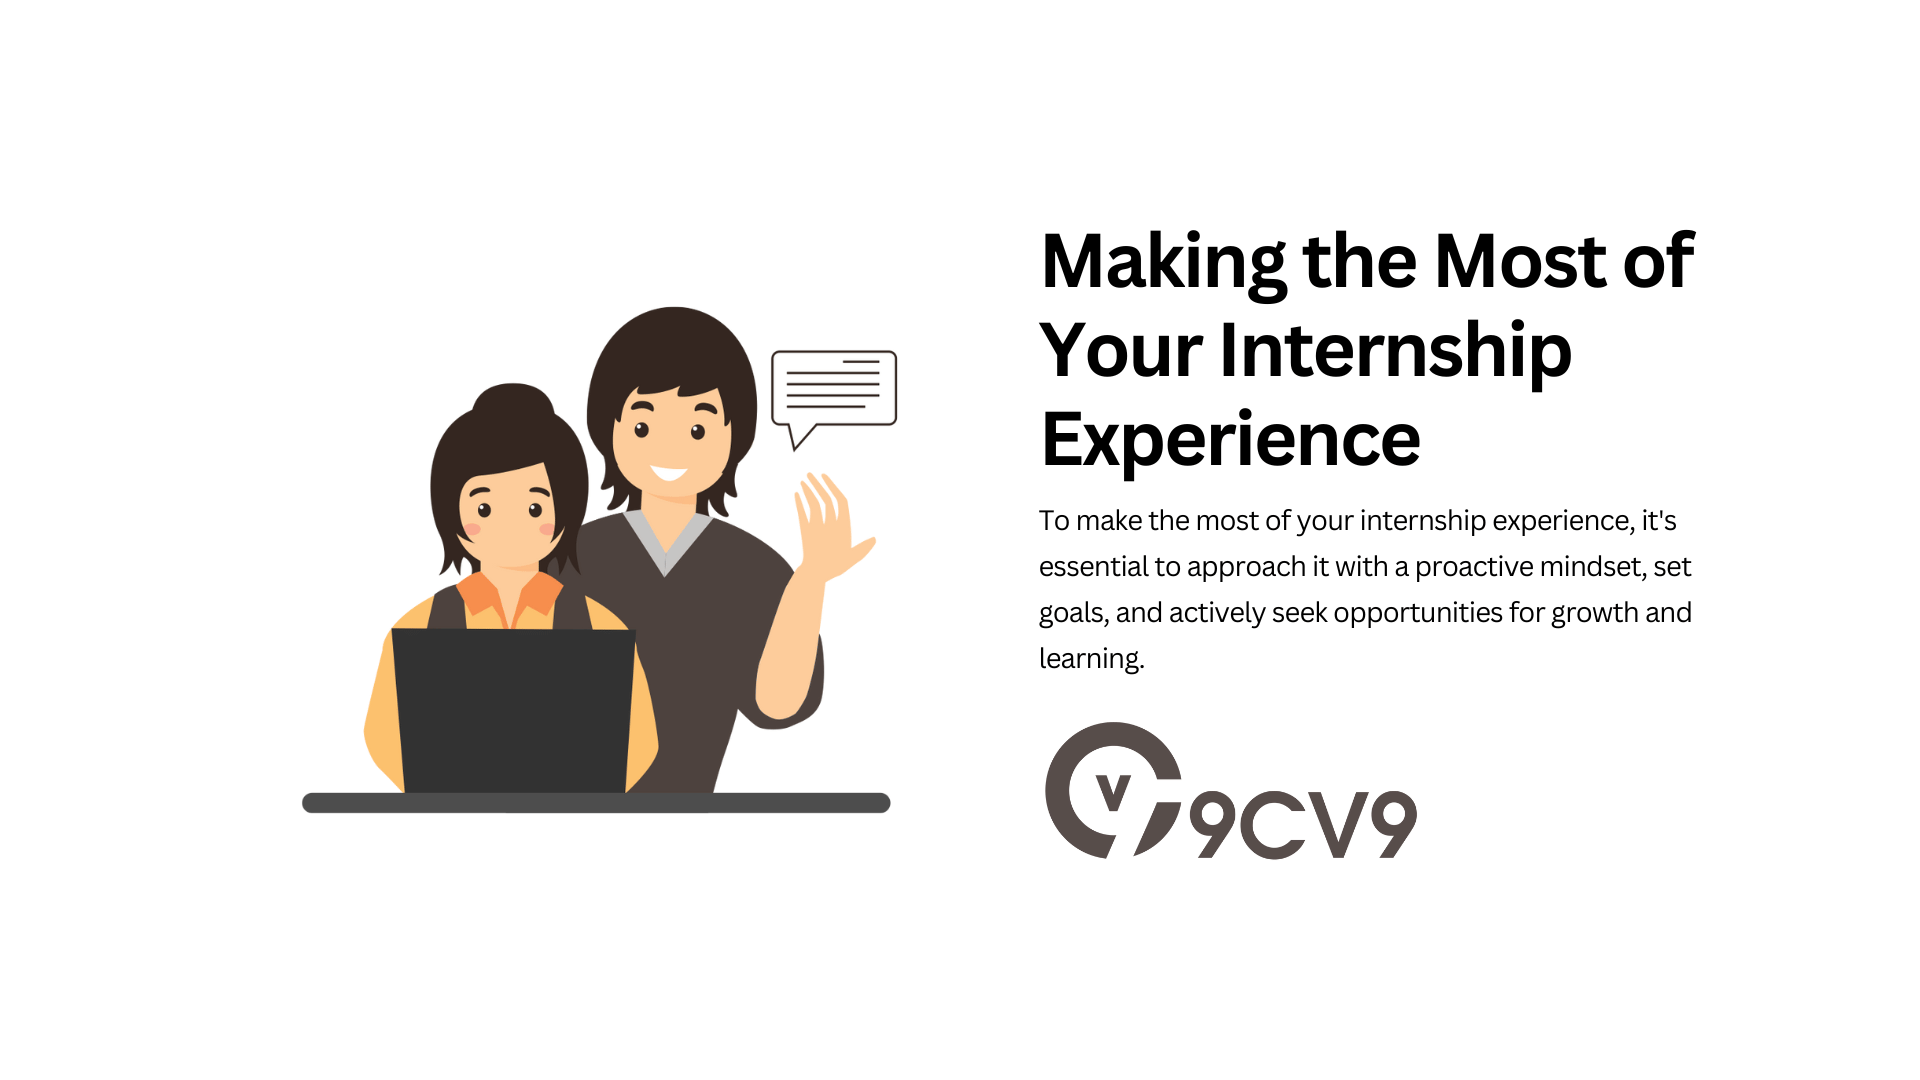 Making the Most of Your Internship Experience